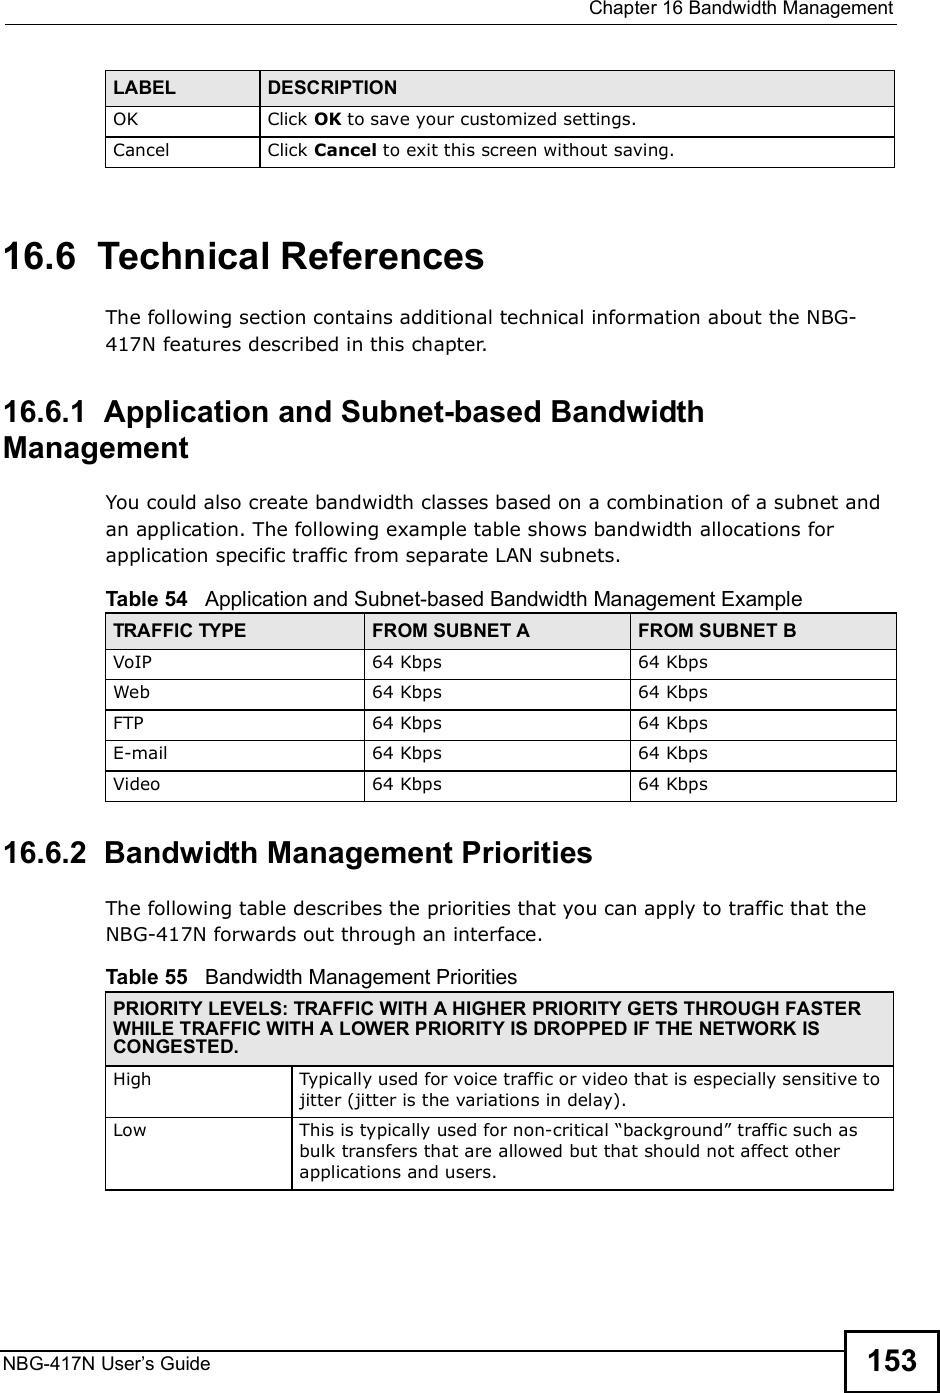  Chapter 16Bandwidth ManagementNBG-417N User s Guide 15316.6  Technical ReferencesThe following section contains additional technical information about the NBG-417N features described in this chapter.16.6.1  Application and Subnet-based Bandwidth ManagementYou could also create bandwidth classes based on a combination of a subnet and an application. The following example table shows bandwidth allocations for application specific traffic from separate LAN subnets.16.6.2  Bandwidth Management Priorities The following table describes the priorities that you can apply to traffic that the NBG-417N forwards out through an interface.OK Click OK to save your customized settings.Cancel Click Cancel to exit this screen without saving.LABEL DESCRIPTIONTable 54   Application and Subnet-based Bandwidth Management Example TRAFFIC TYPE FROM SUBNET A FROM SUBNET BVoIP 64 Kbps 64 KbpsWeb 64 Kbps 64 KbpsFTP 64 Kbps 64 KbpsE-mail 64 Kbps 64 KbpsVideo 64 Kbps 64 KbpsTable 55   Bandwidth Management PrioritiesPRIORITY LEVELS: TRAFFIC WITH A HIGHER PRIORITY GETS THROUGH FASTER WHILE TRAFFIC WITH A LOWER PRIORITY IS DROPPED IF THE NETWORK IS CONGESTED.HighTypically used for voice traffic or video that is especially sensitive to jitter (jitter is the variations in delay).LowThis is typically used for non-critical &quot;background# traffic such as bulk transfers that are allowed but that should not affect other applications and users. 